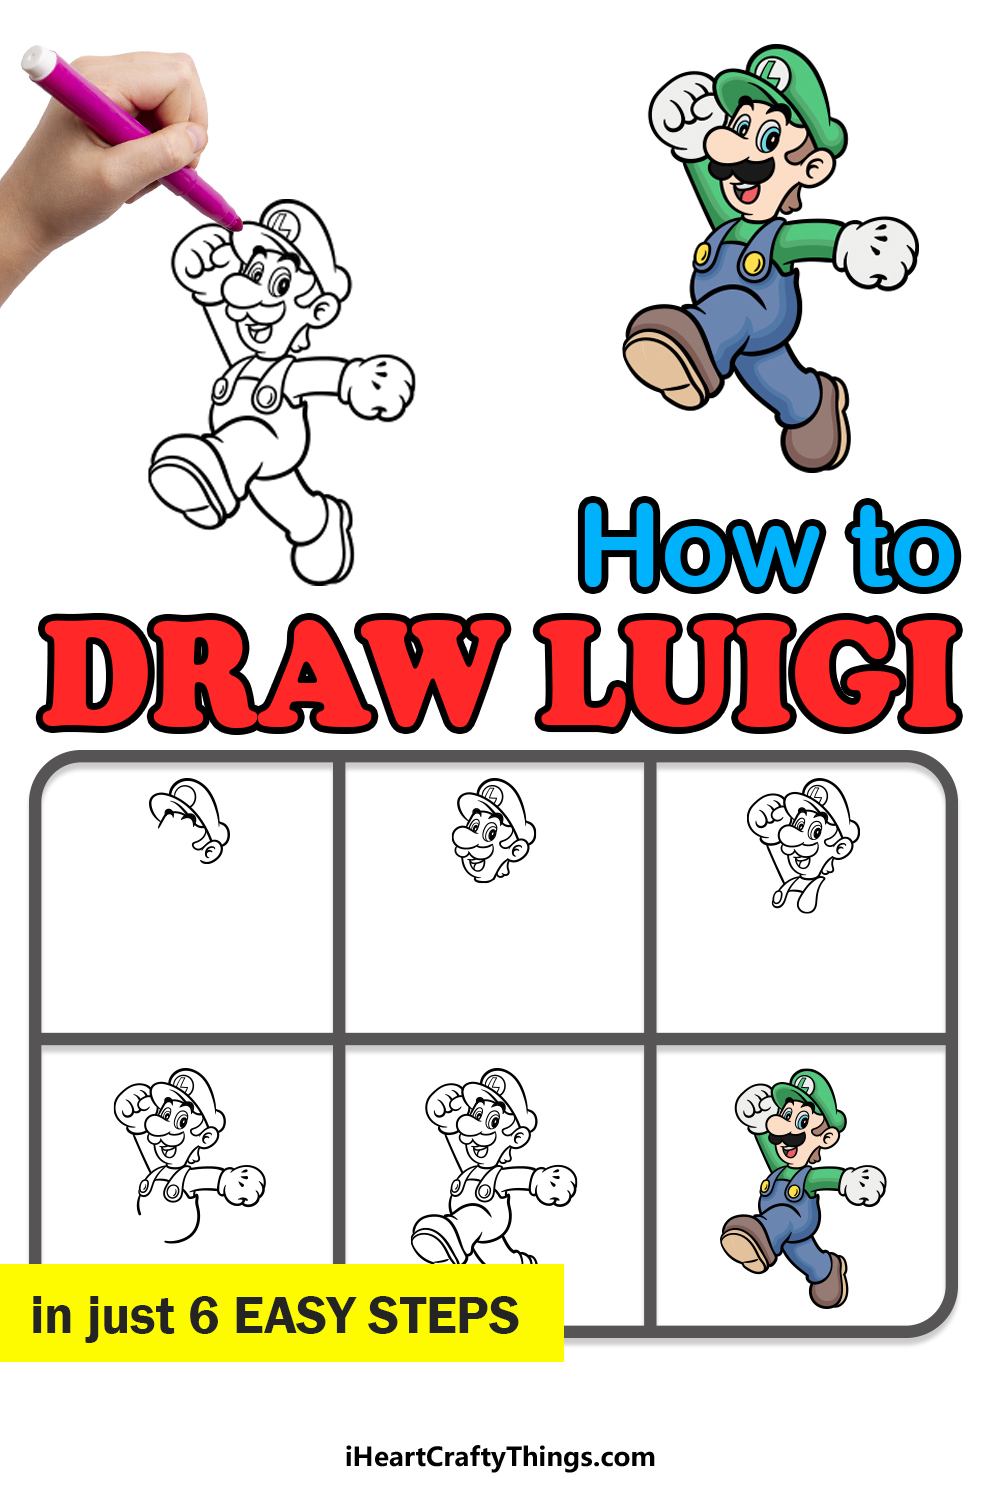 how to draw luigi in 6 easy steps